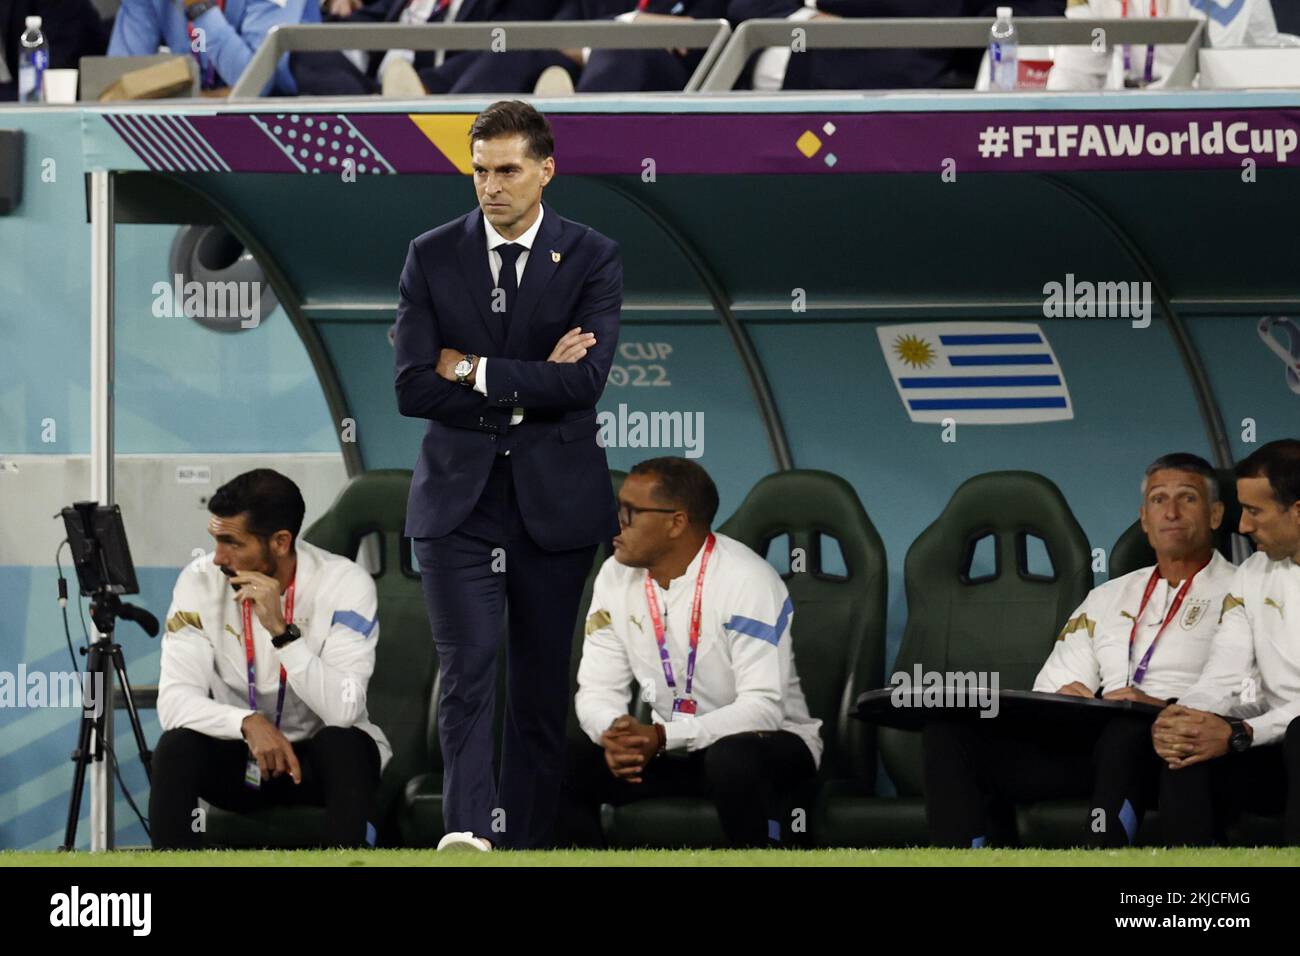 DOHA - Uruguay coach Diego Alonso during the FIFA World Cup Qatar 2022 group H match between Uruguay and South Korea at Education City Stadium on November 24, 2022 in Doha, Qatar. AP | Dutch Height | MAURICE OF STONE Credit: ANP/Alamy Live News Stock Photo